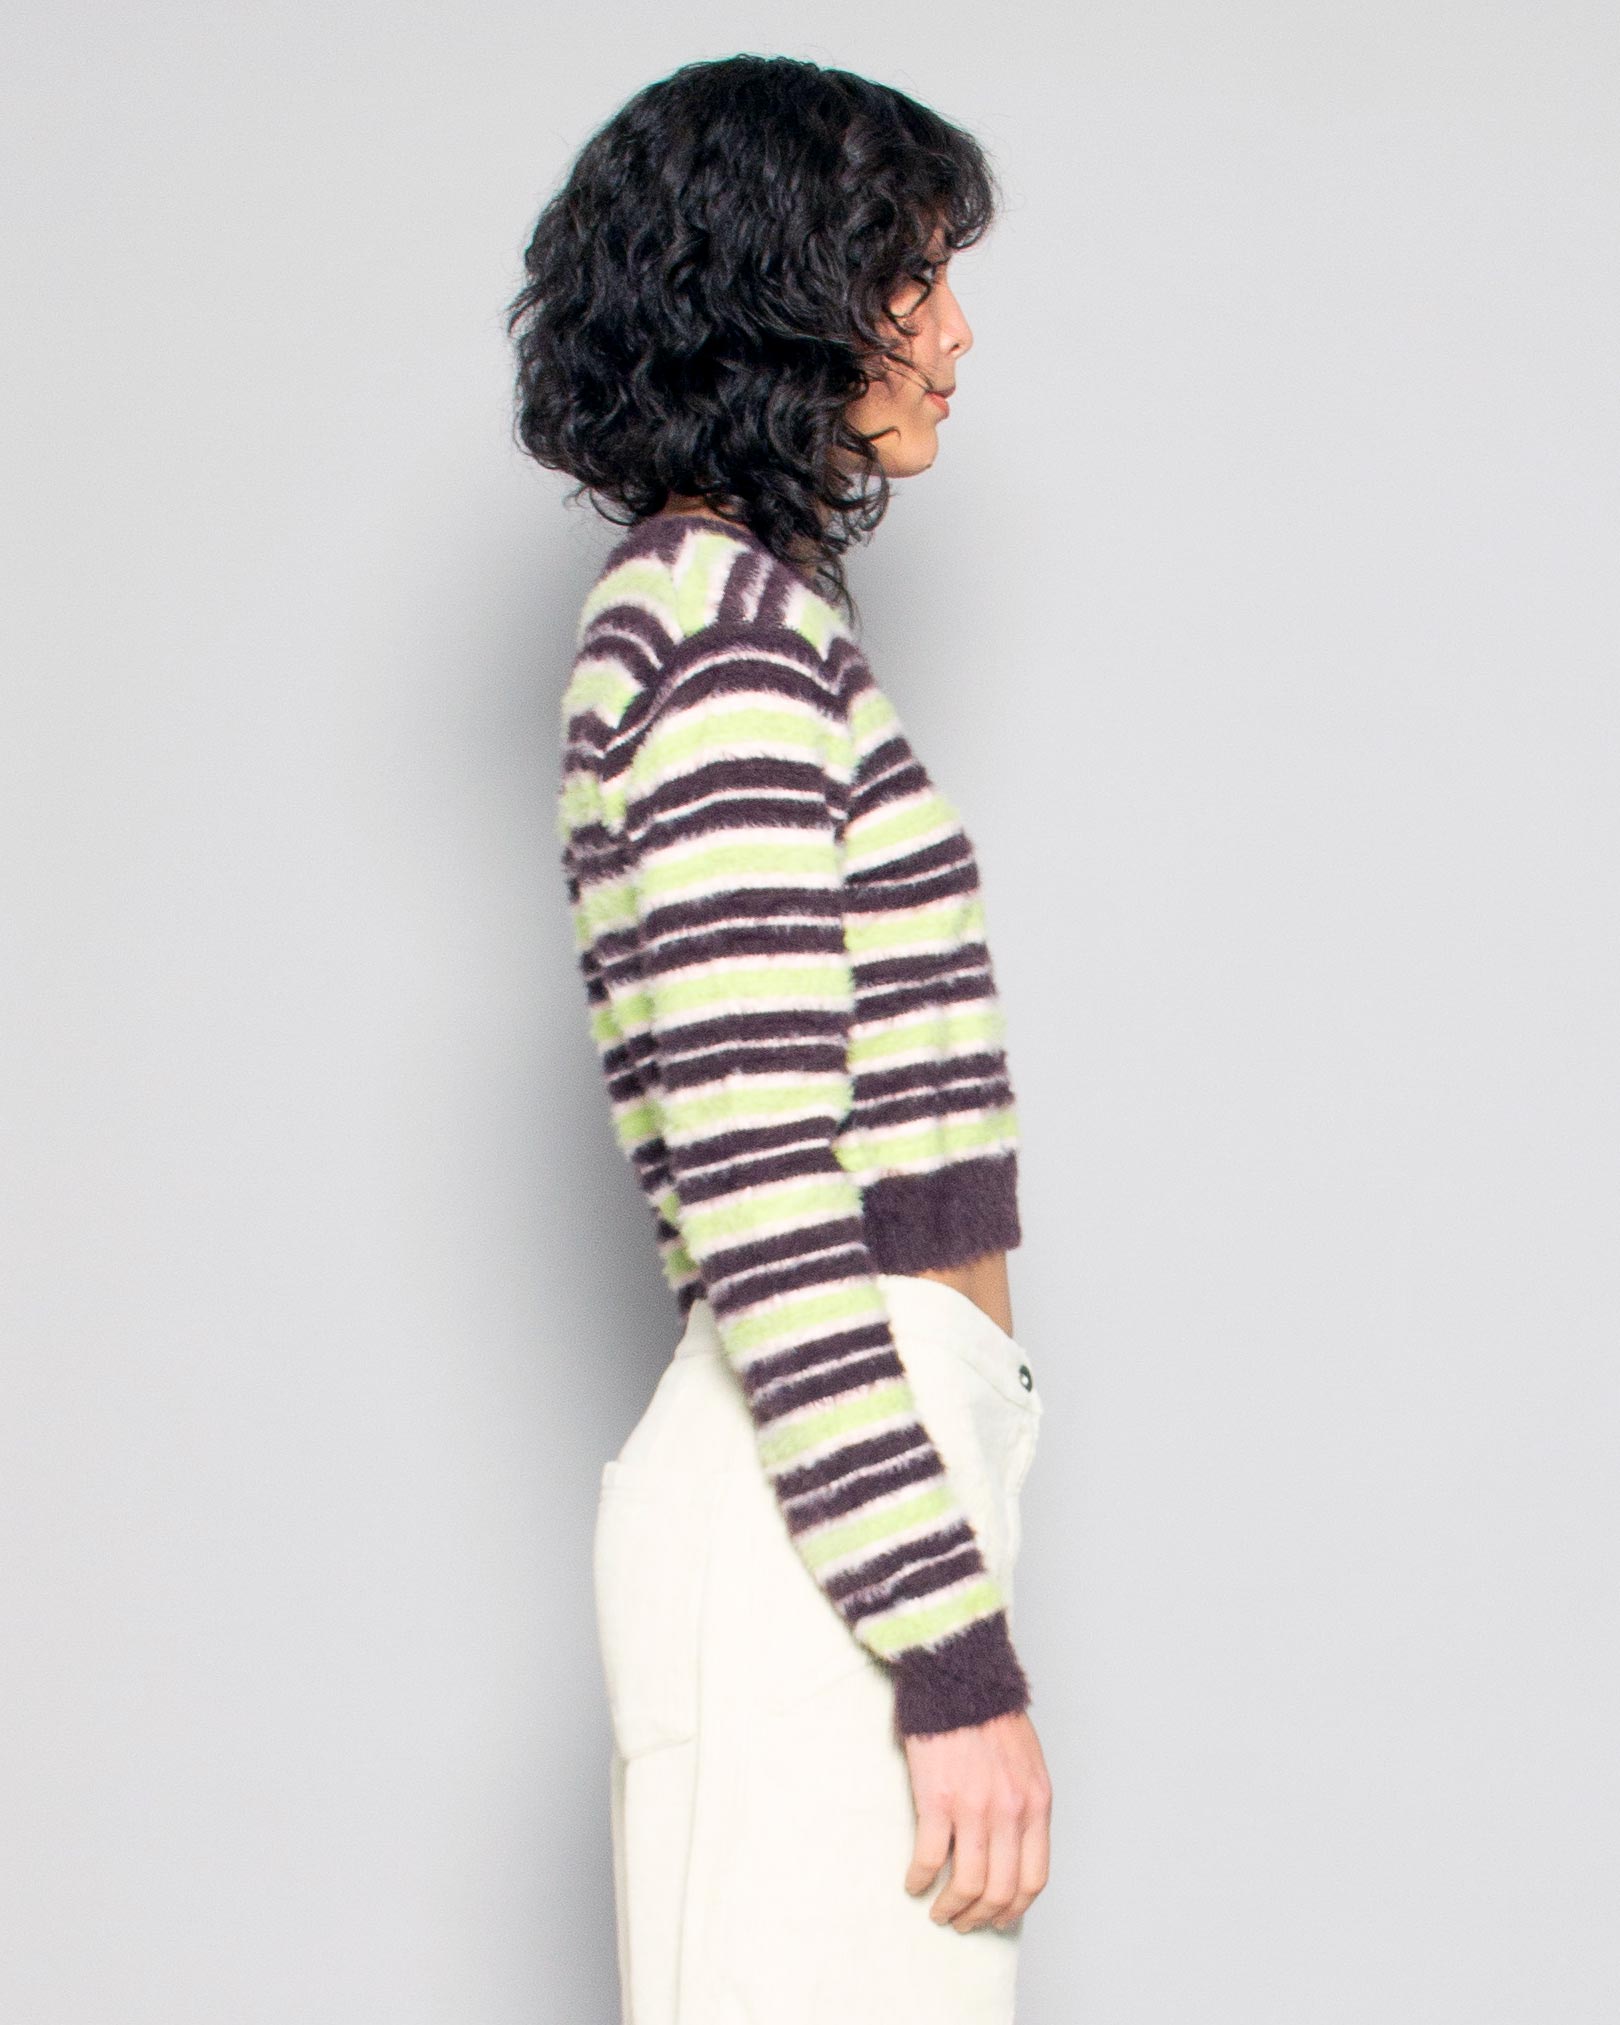 PERSONS Vera Fuzzy Sweater in Matcha Stripe available at Lahn.shop